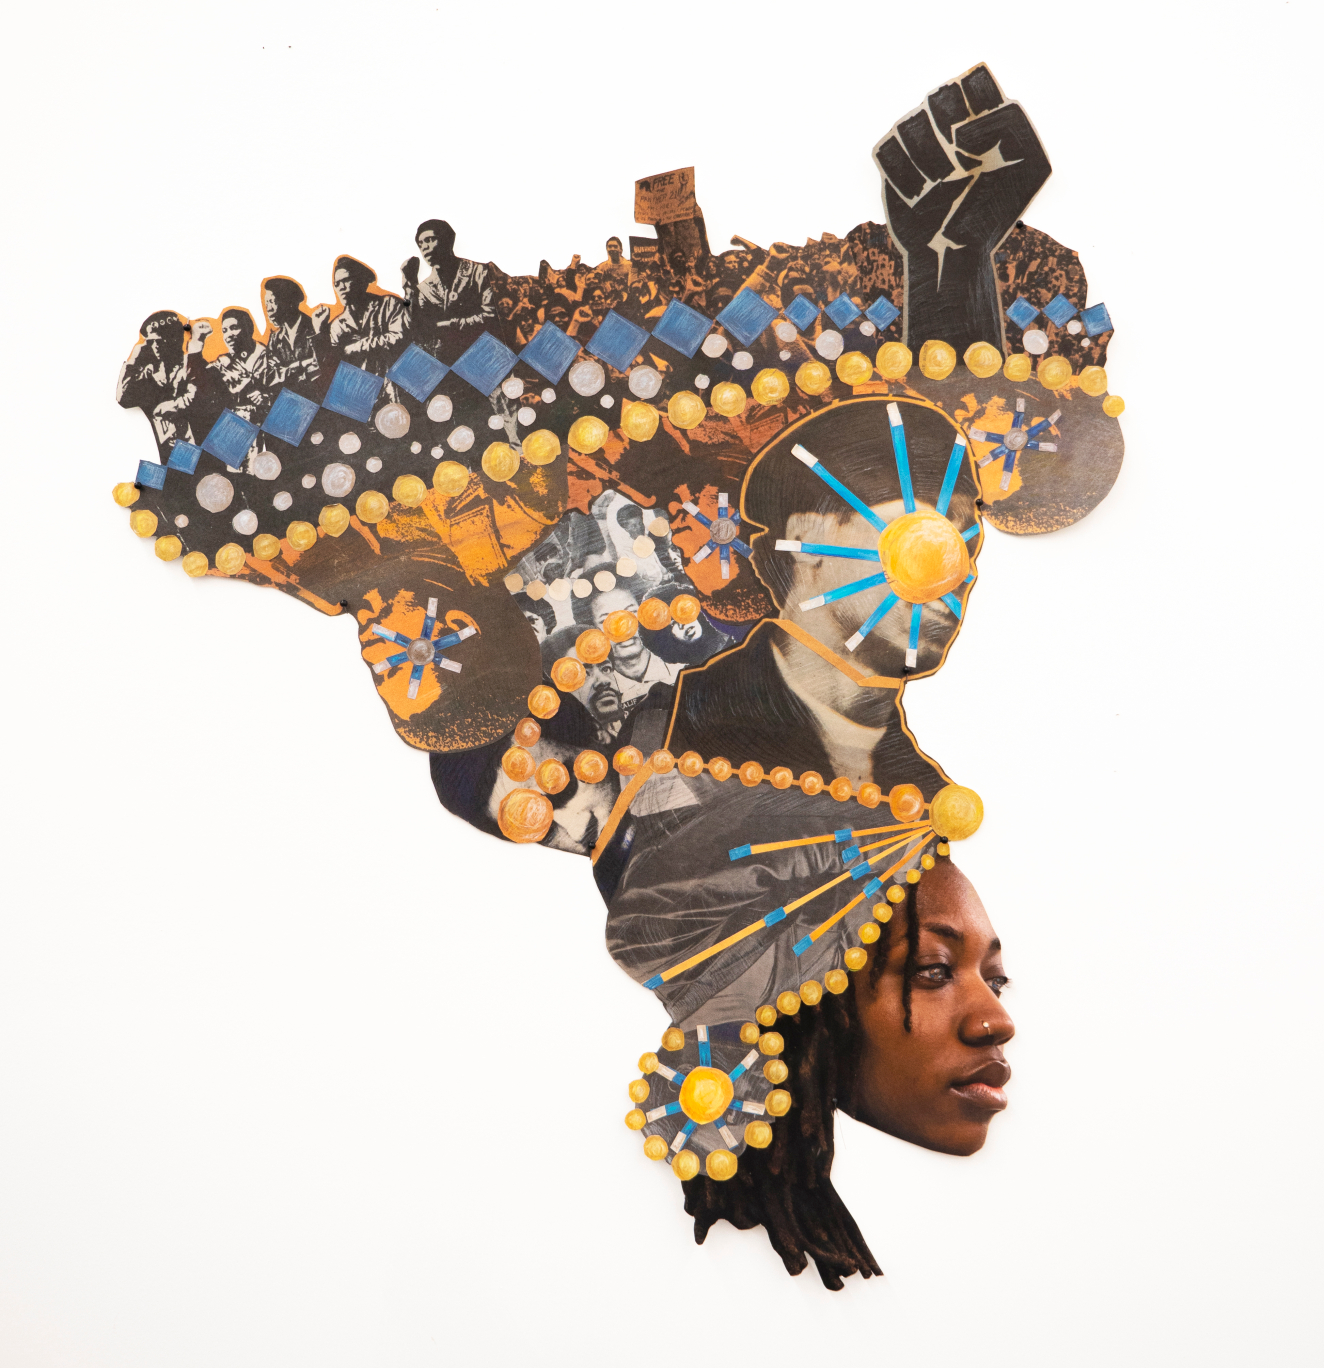 A collage of a Black woman in a headdress composed of cutouts of Black activists and protestors, overlaid by lines of orange, yellow, blue, and white dots and squares.